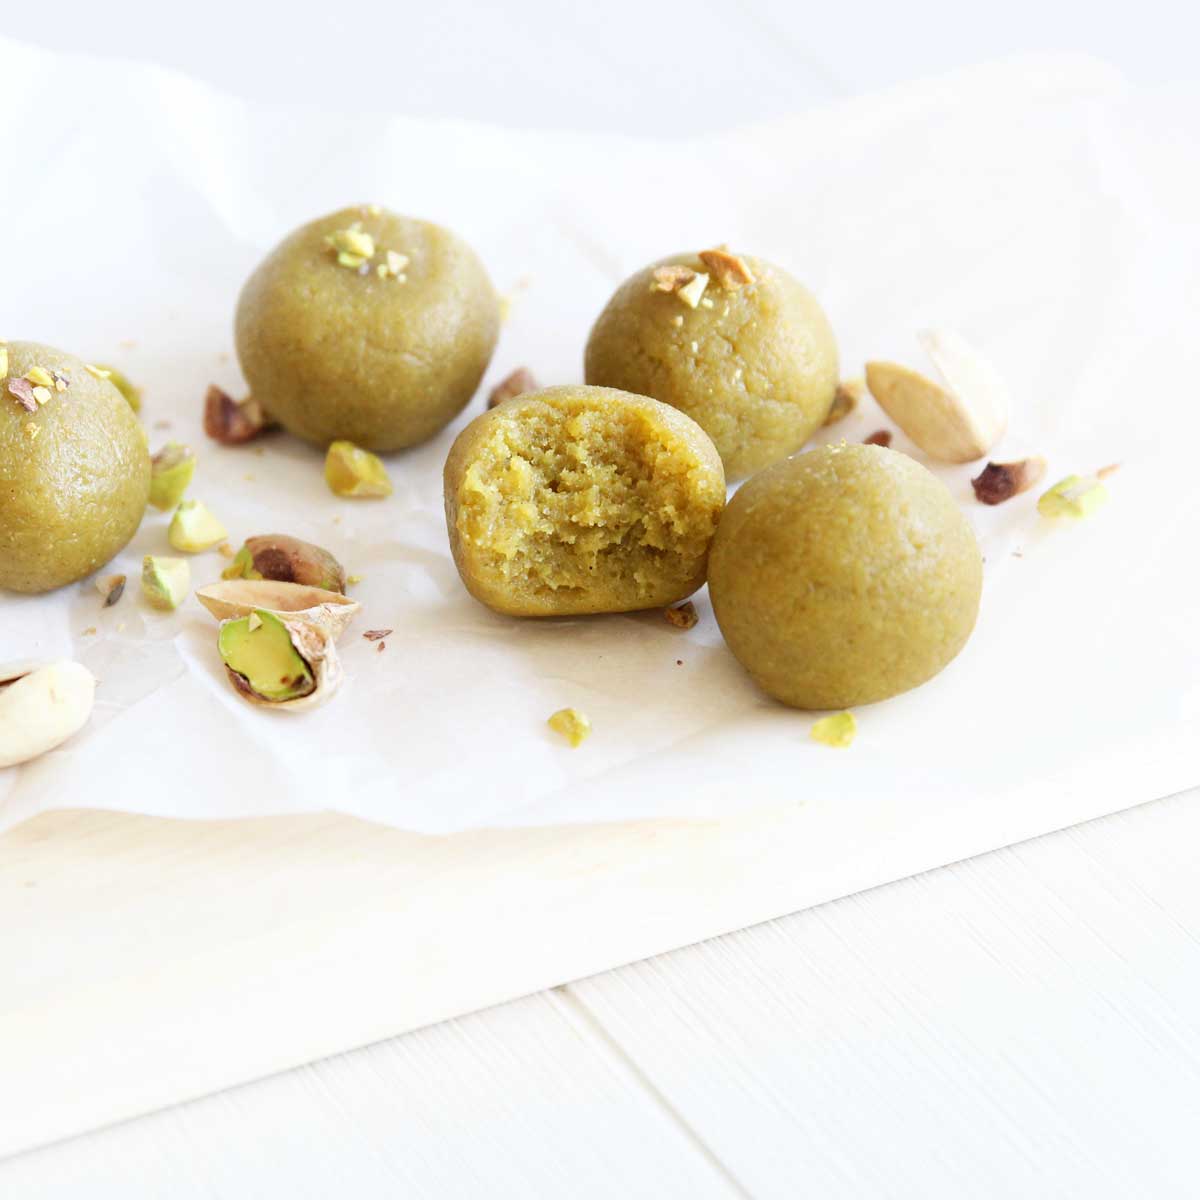 Keto Pistachio Cheesecake Protein Balls (Low Carb Energy Bites made with Collagen Peptides) - Sweet Matcha Whipped Cream